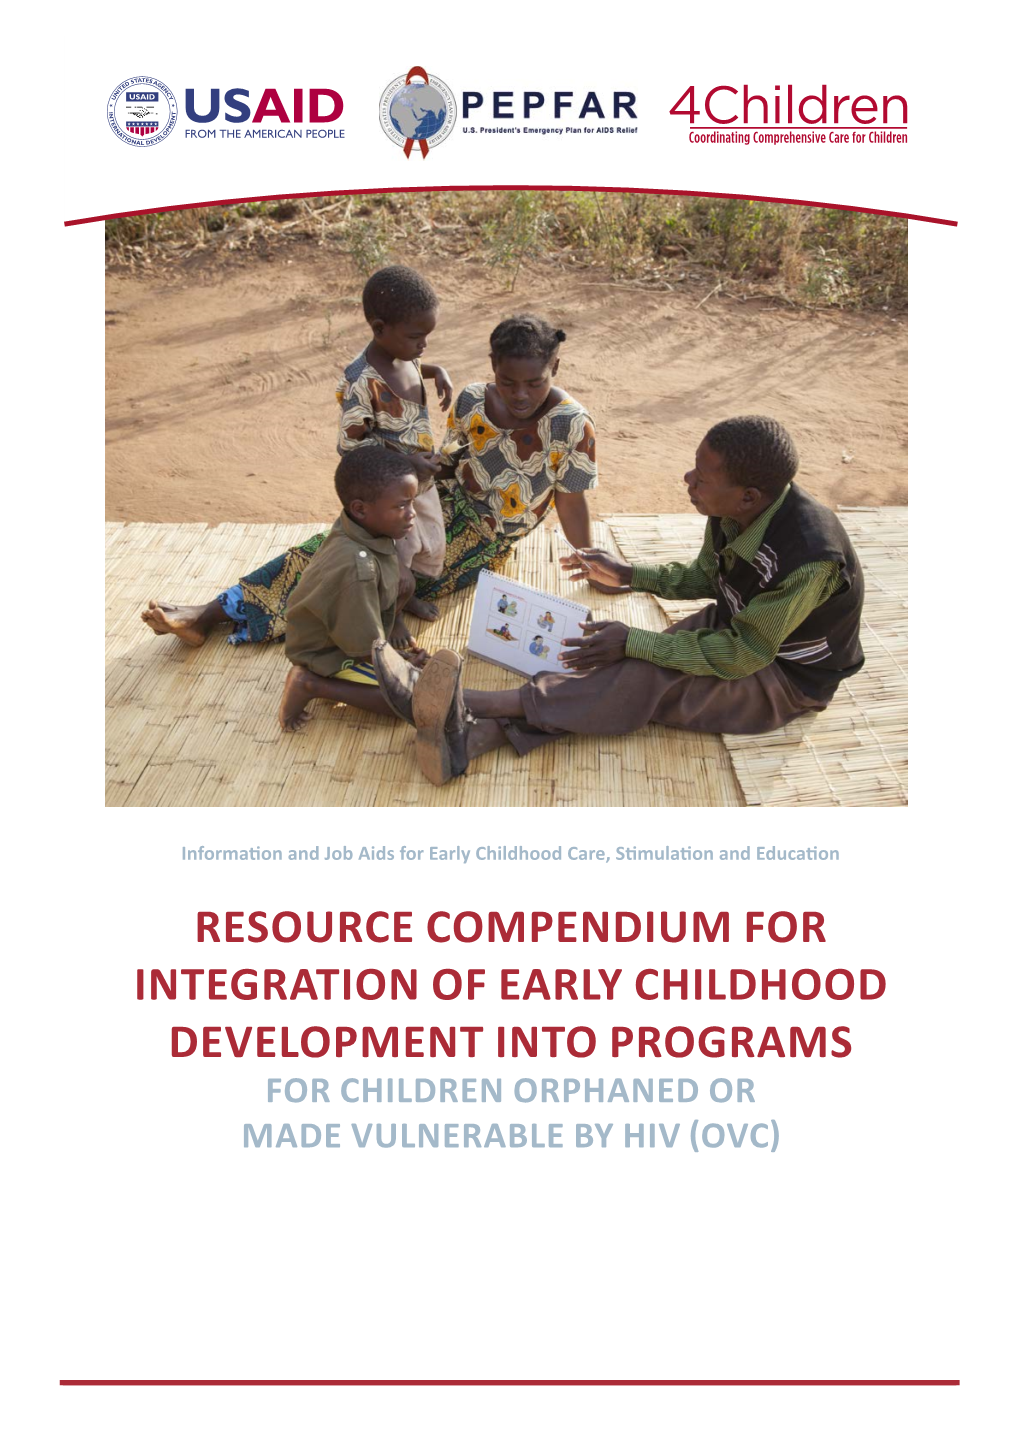 Early Childhood Development Into Programs for Children Orphaned Or Made Vulnerable by Hiv (Ovc)